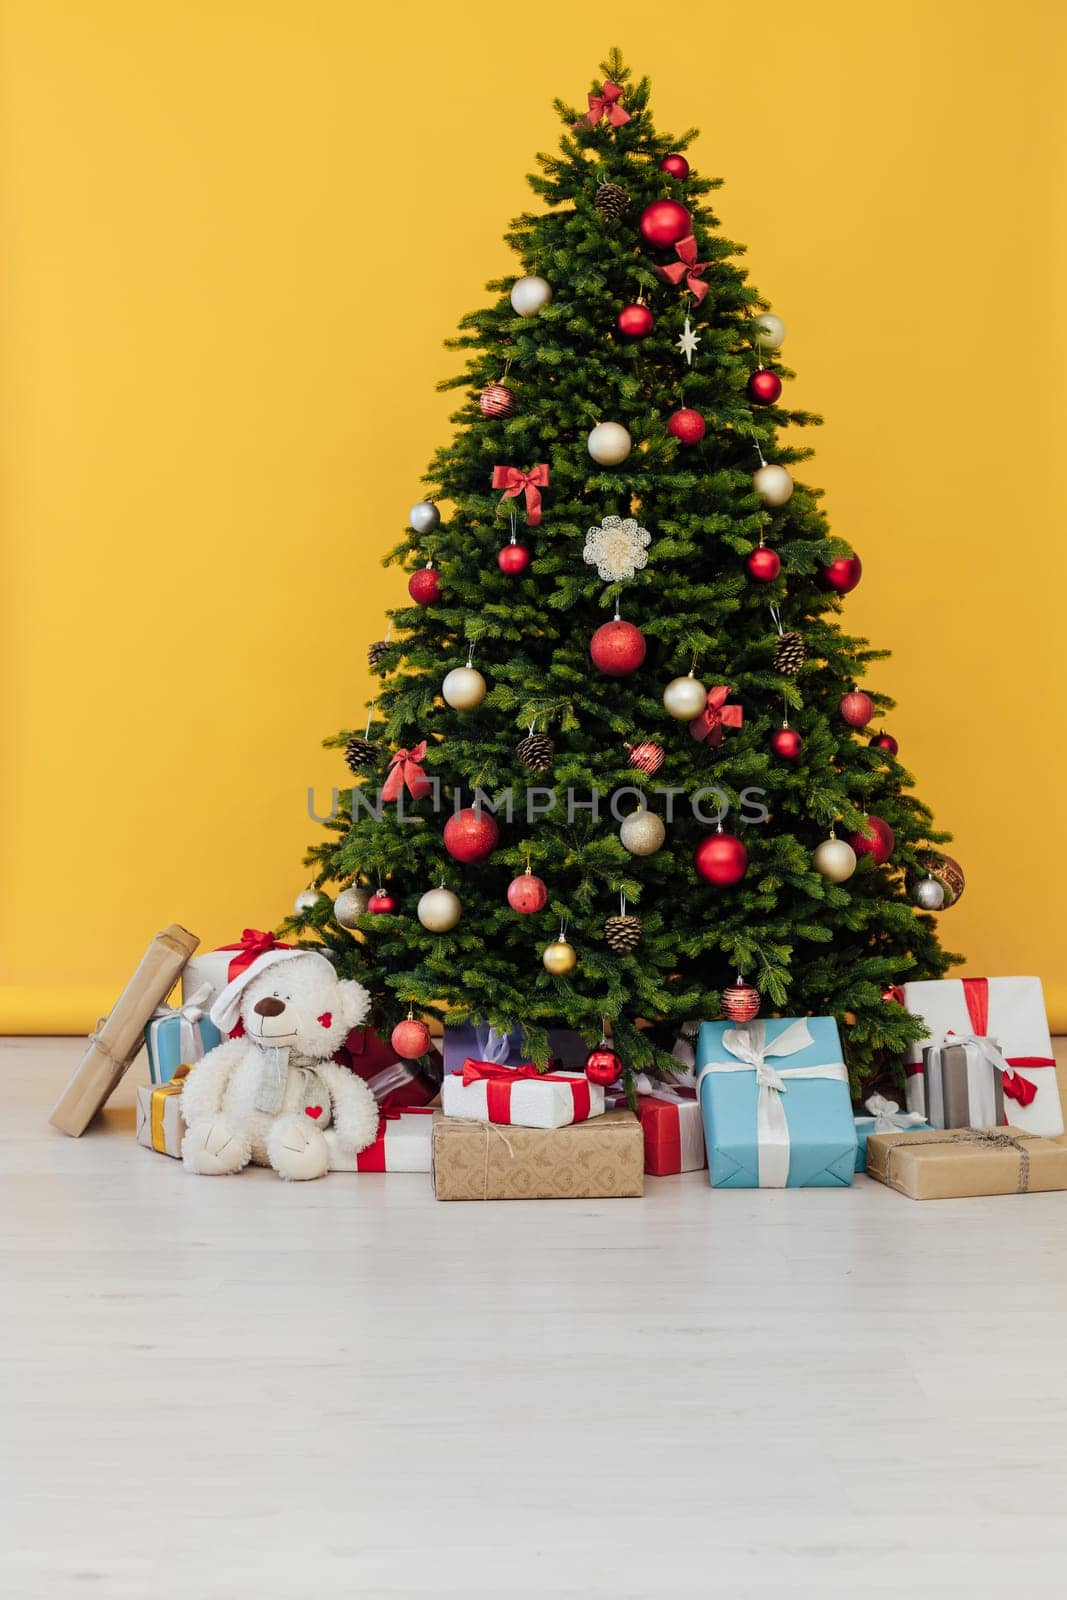 Christmas tree with presents underneath in living room